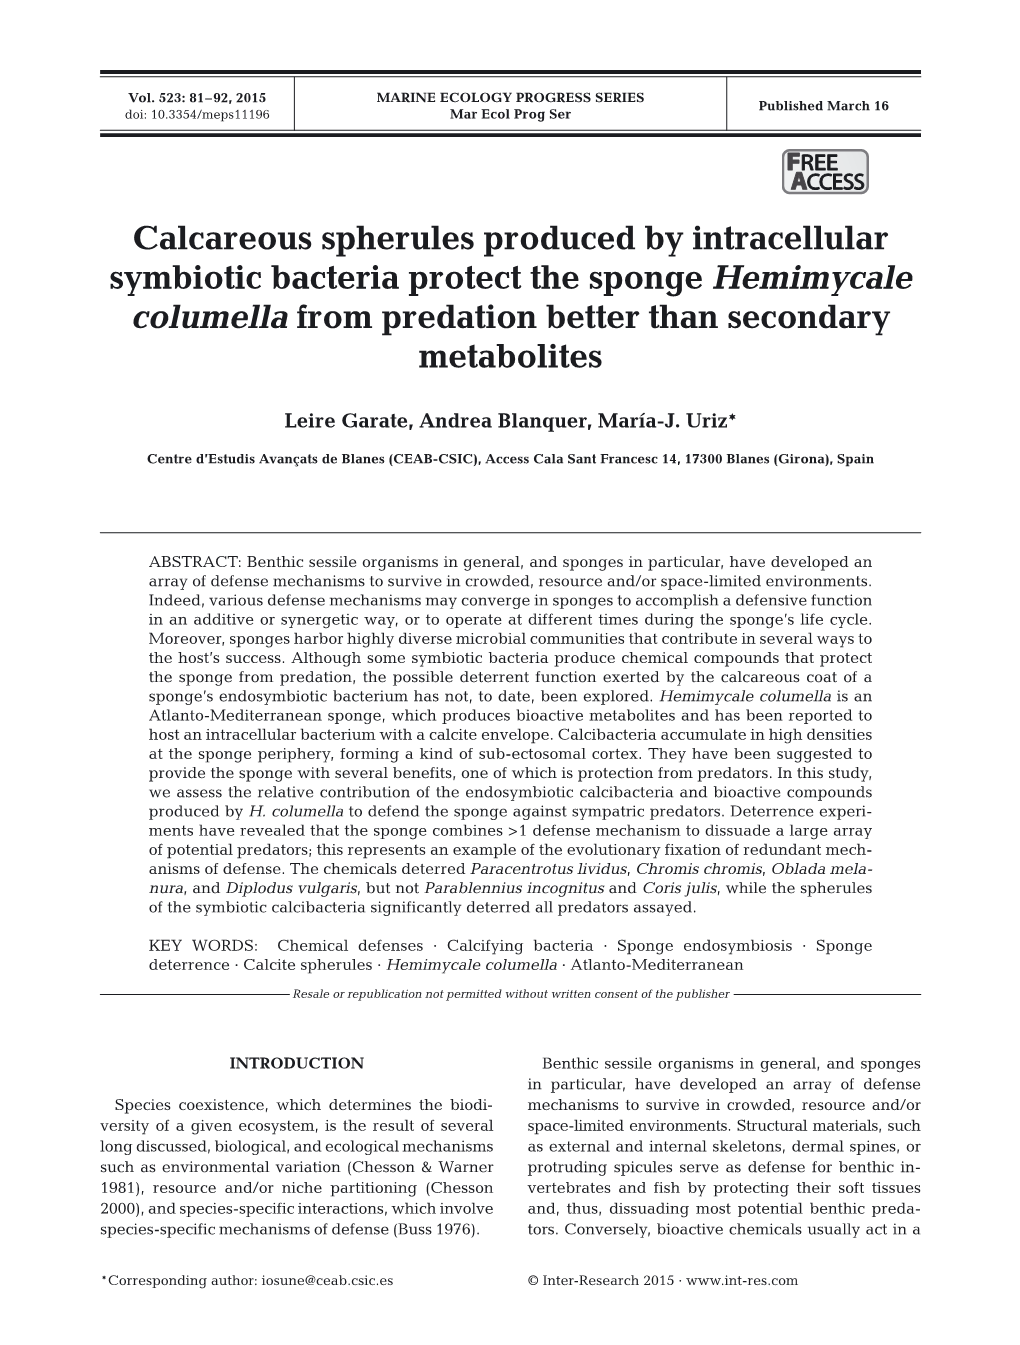 Calcareous Spherules Produced by Intracellular Symbiotic Bacteria Protect the Sponge Hemimycale Columella from Predation Better Than Secondary Metabolites